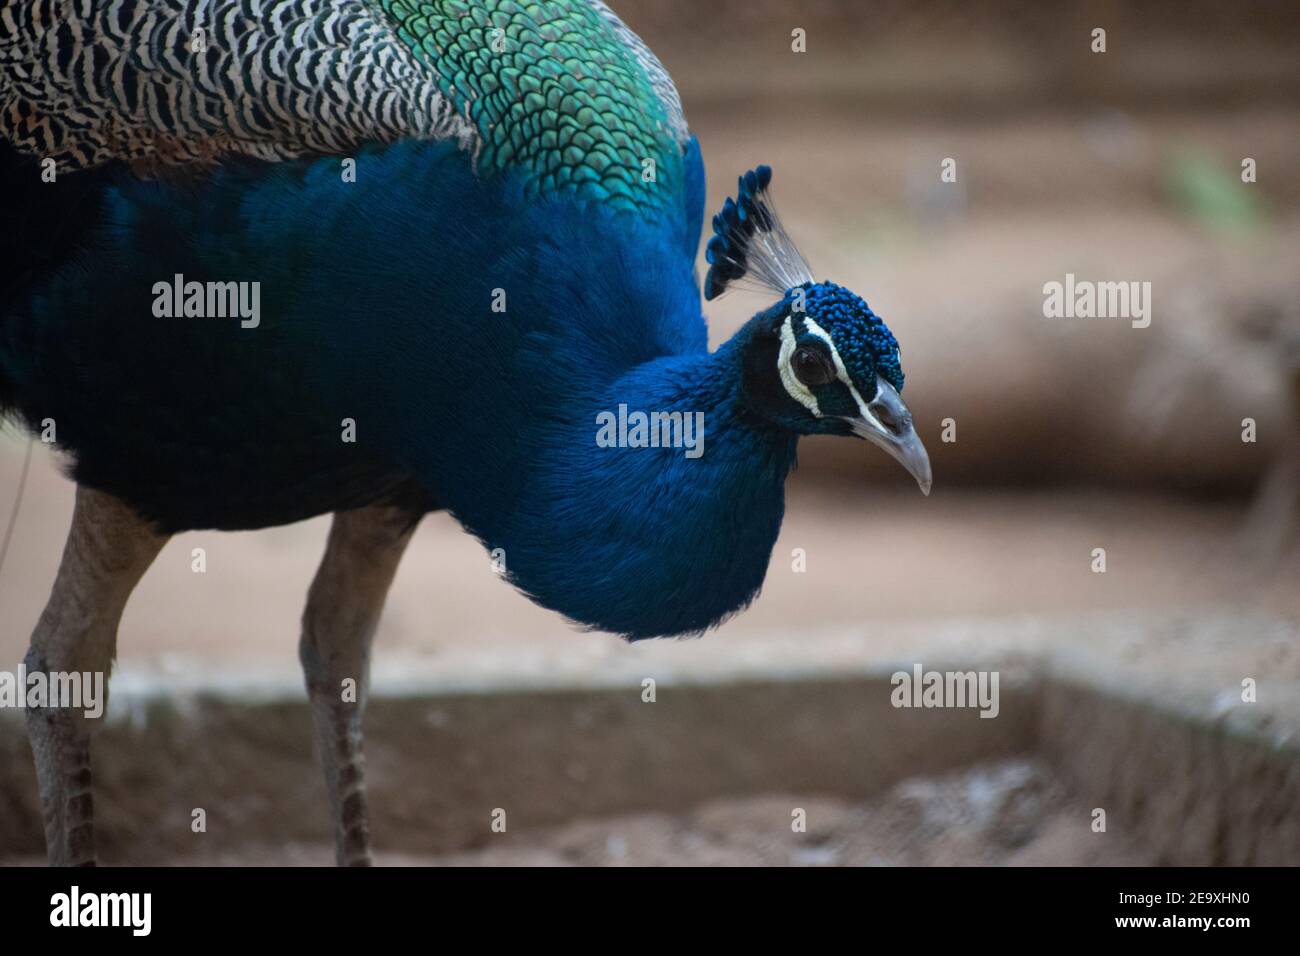 Pavo is a genus of two species in the pheasant family. The two species, along with the Congo peacock, are known as peafowl. Stock Photo